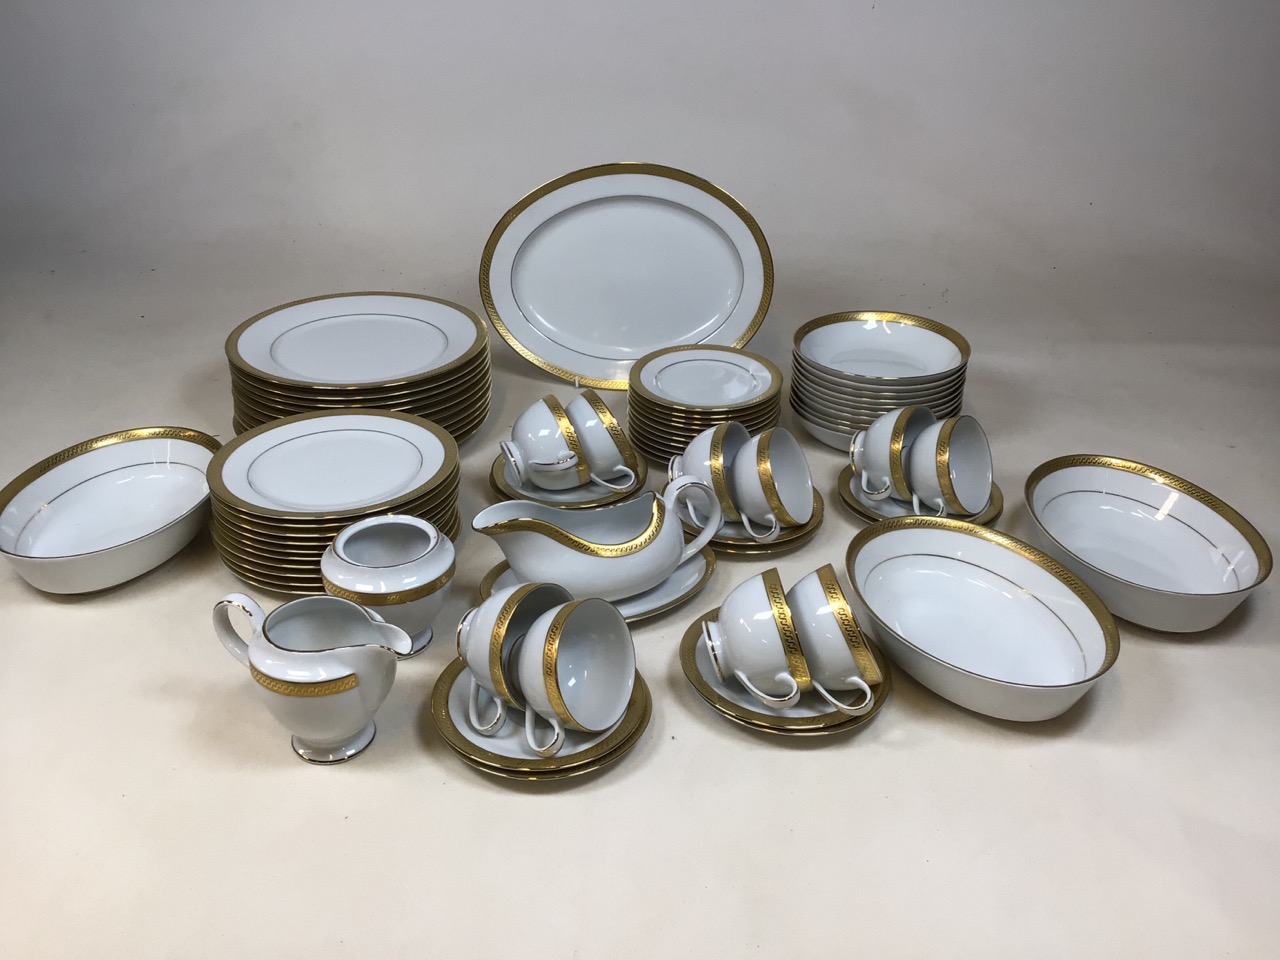 A Fairmont Fine China Linton Gold 9303 dinner service for ten. Includes dinner plates, breakfast